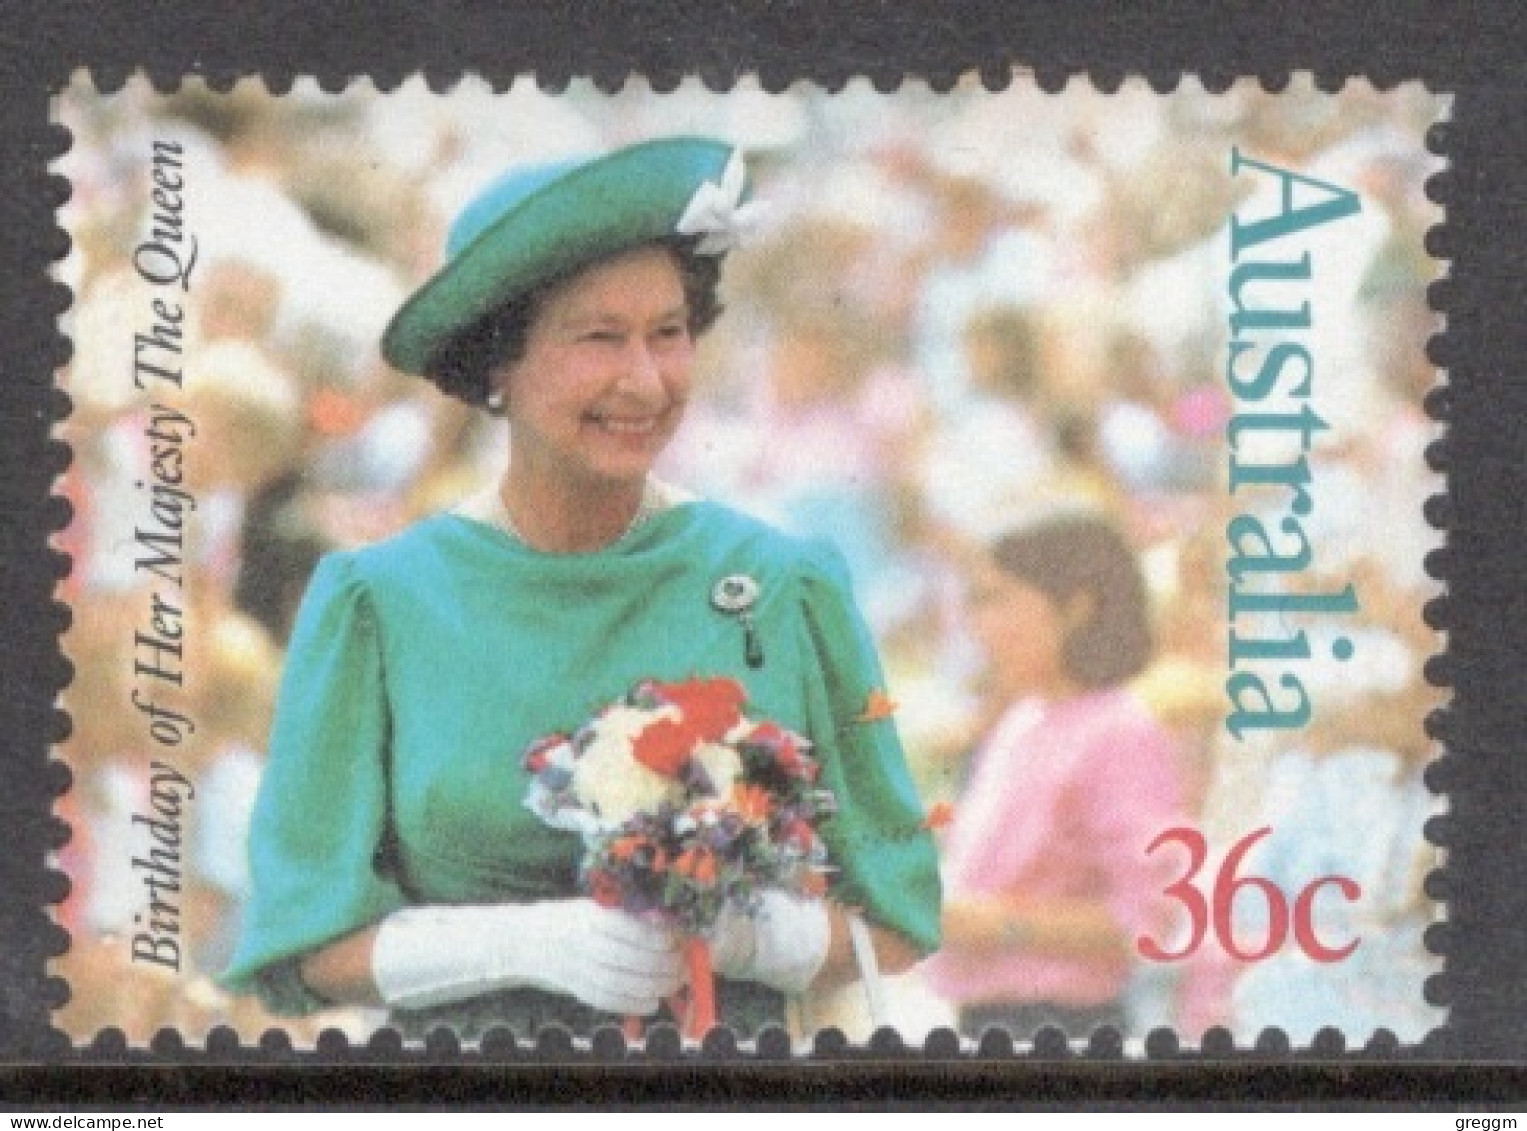 Australia 1987 Single Stamp The 61st Anniversary Of The Birth Of Queen Elizabeth II In Unmounted Mint - Mint Stamps